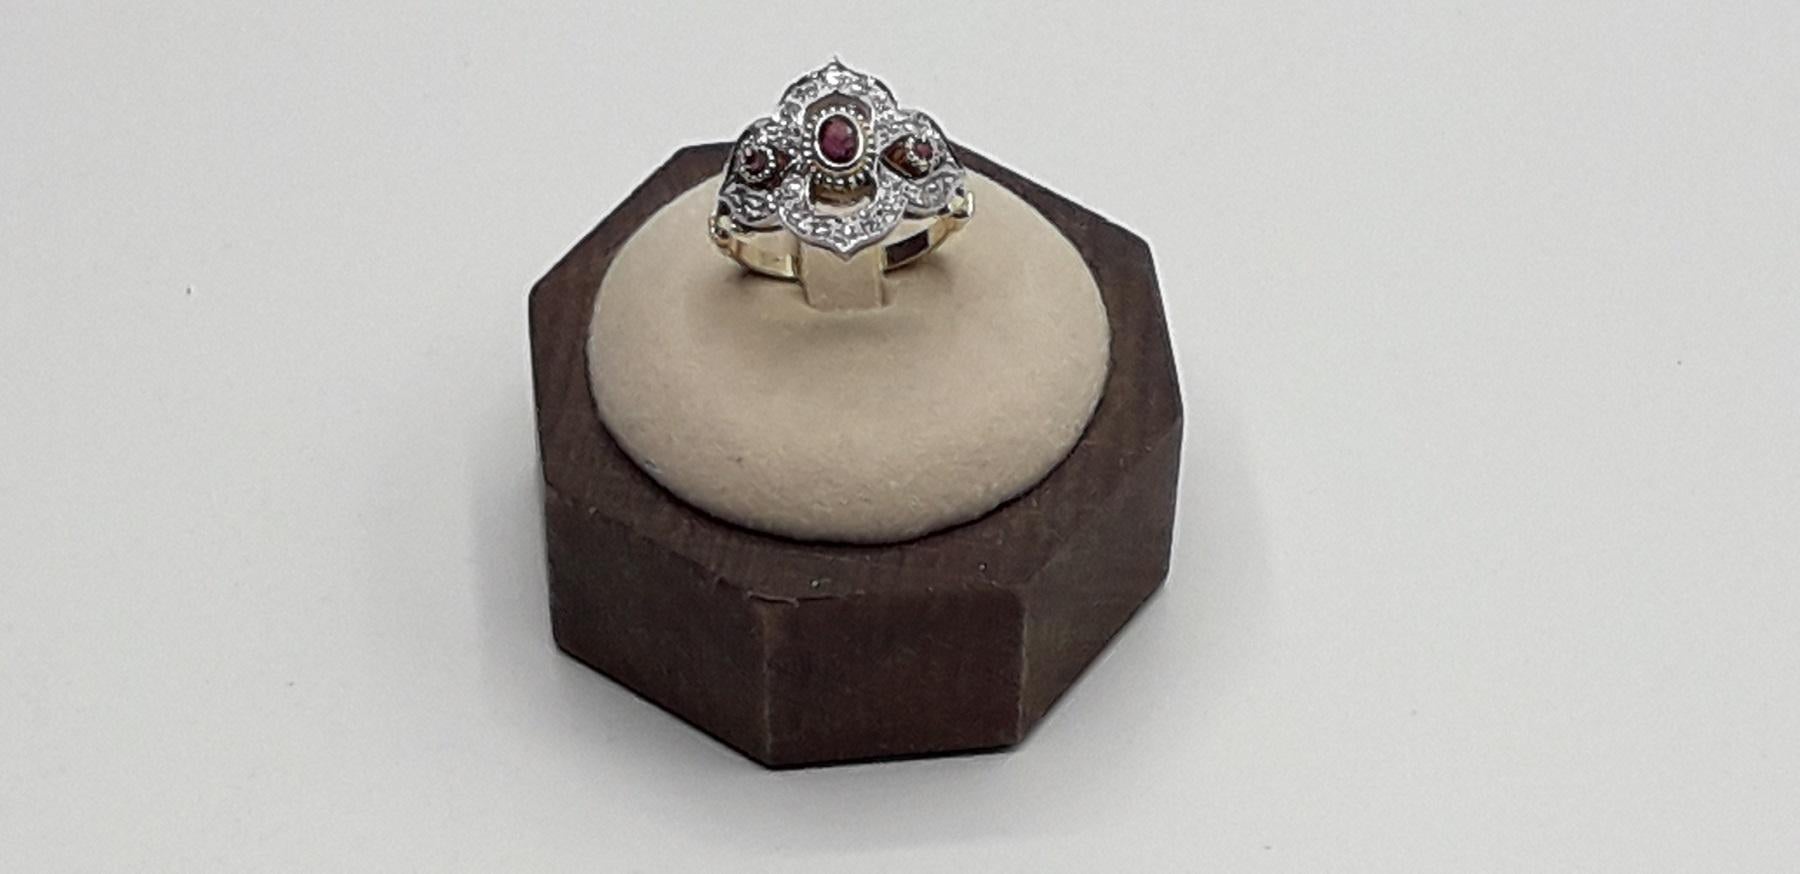 yellow and white gold ring with 0.30 carat brillant cut diamonds and 0.40 carat rubys. New contemporary jewelry.  Ring size Italian 15 please see the conversion in the picture. This beautiful ring of Italian luxury jewelry is perfect for a refined